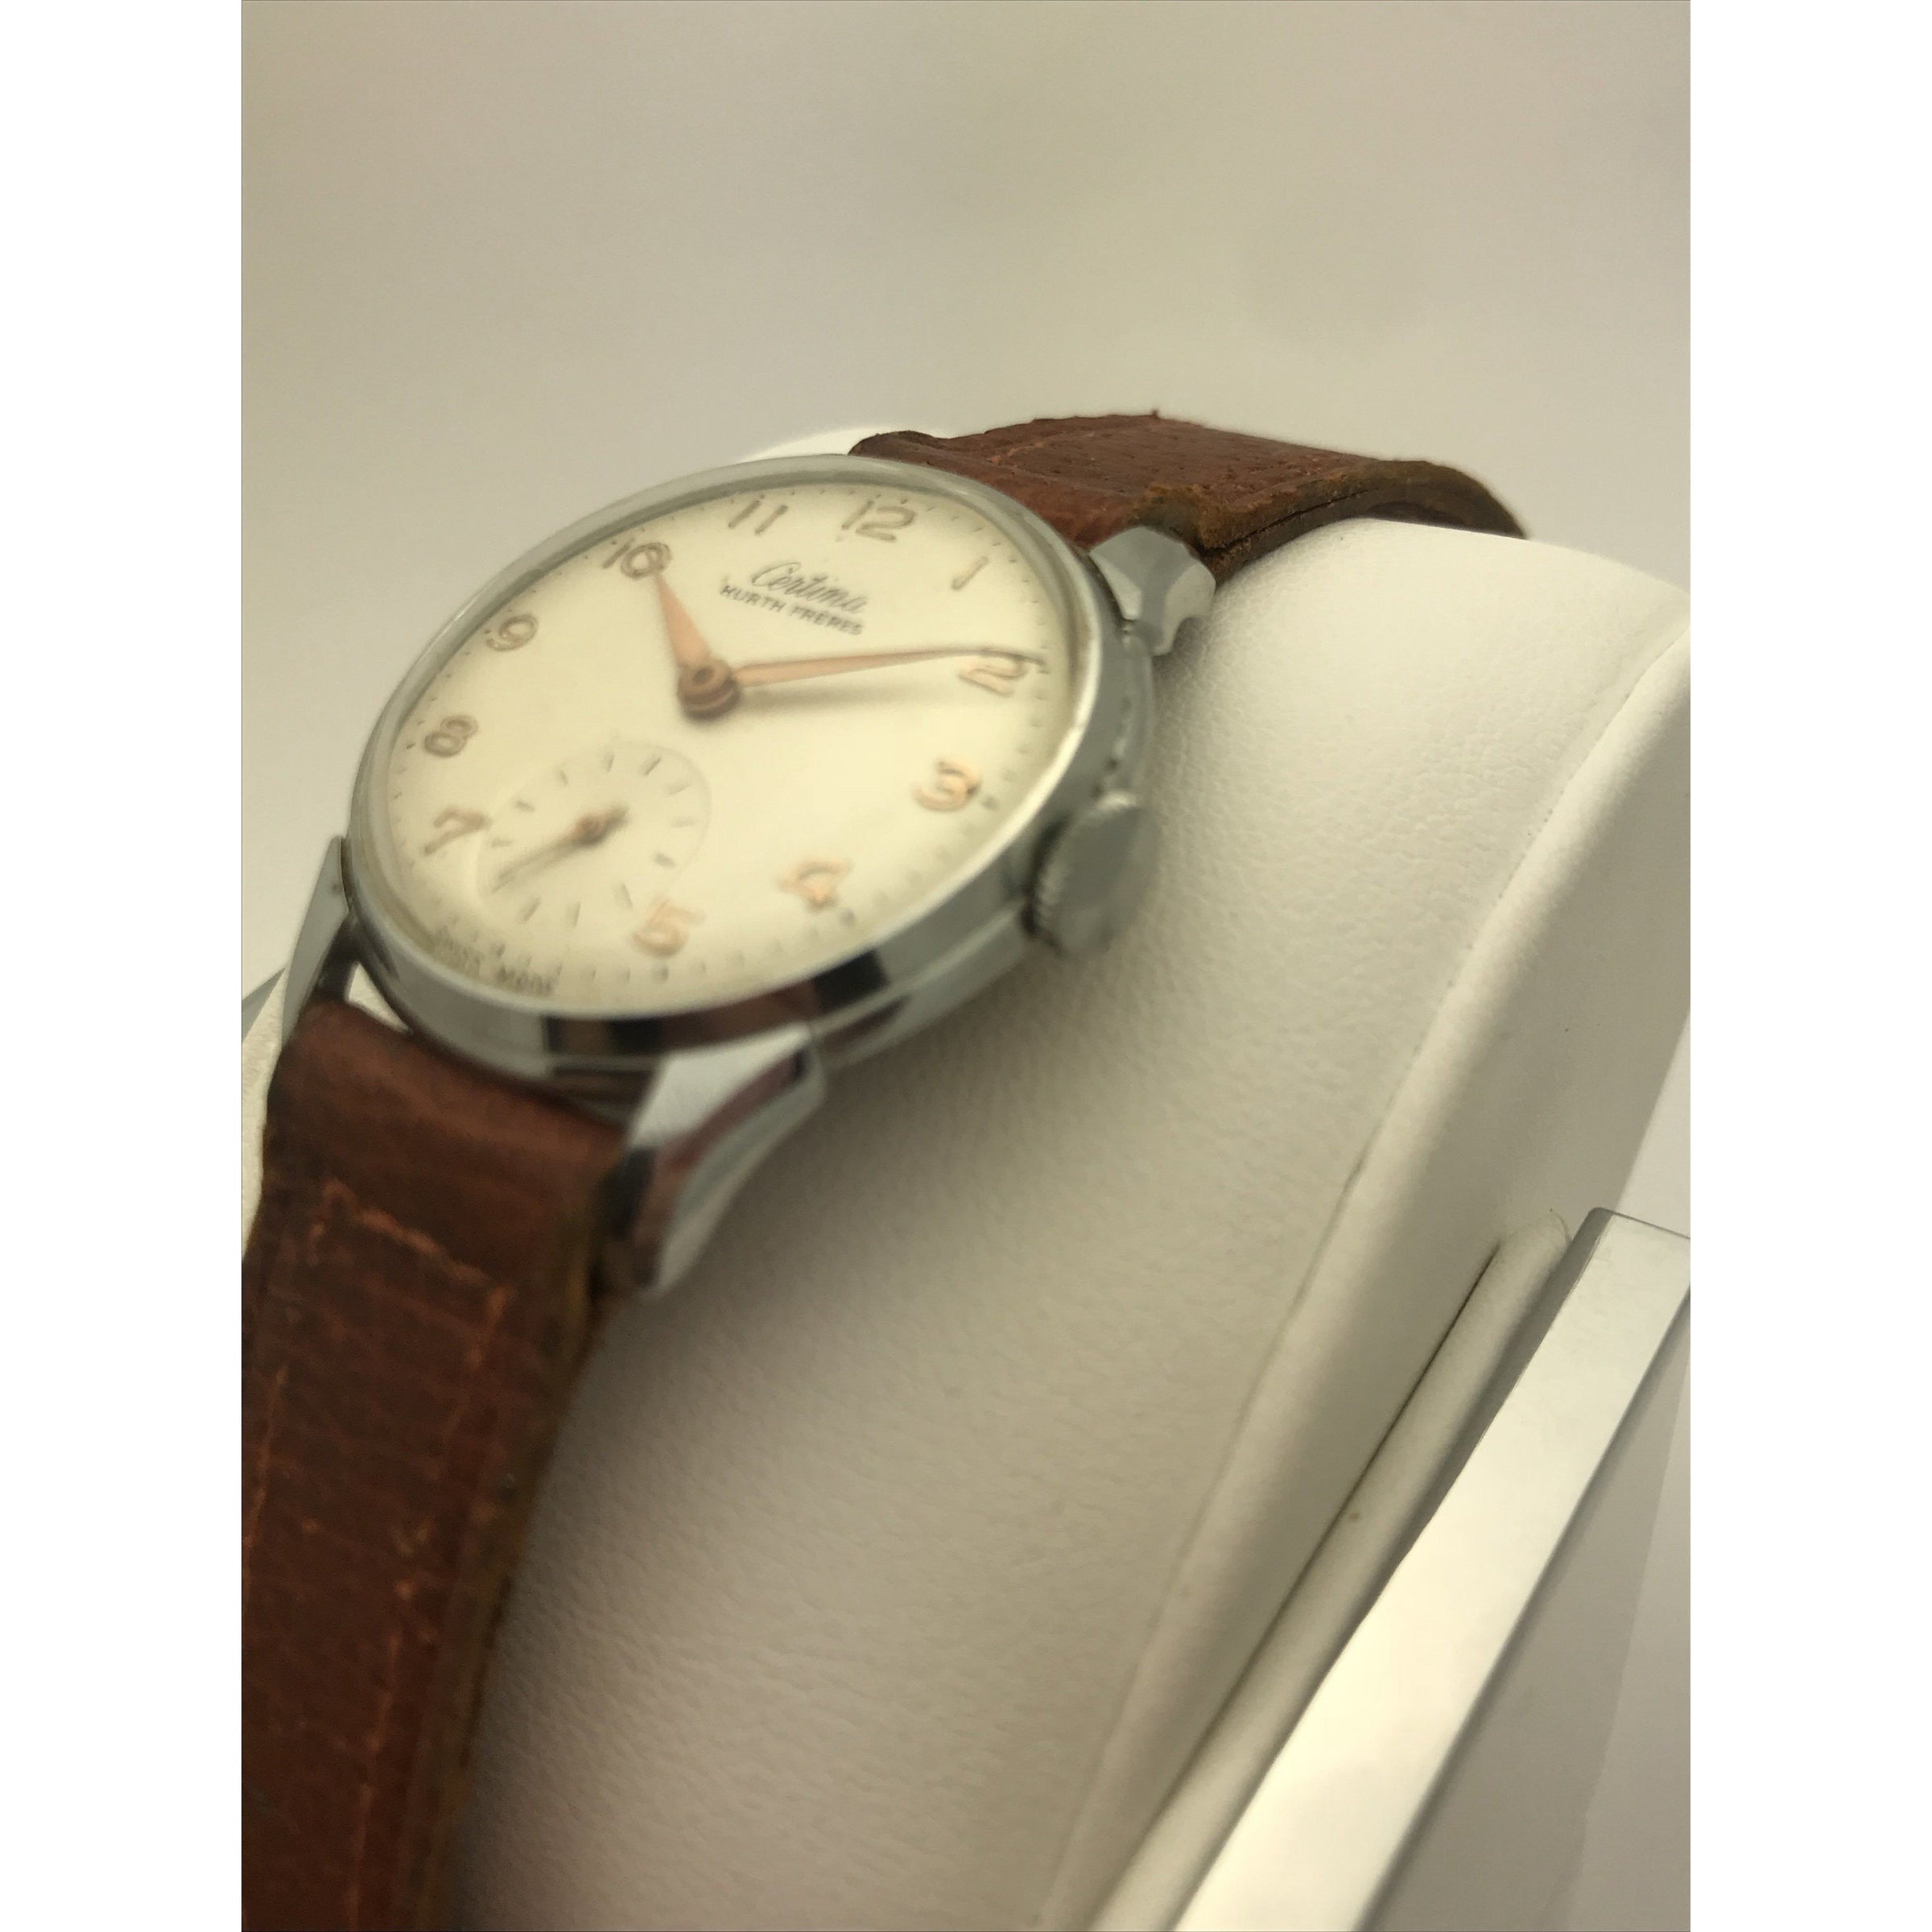 Certina Kurth Freres Ladies White Dial Brown Leather Band Watch 40139